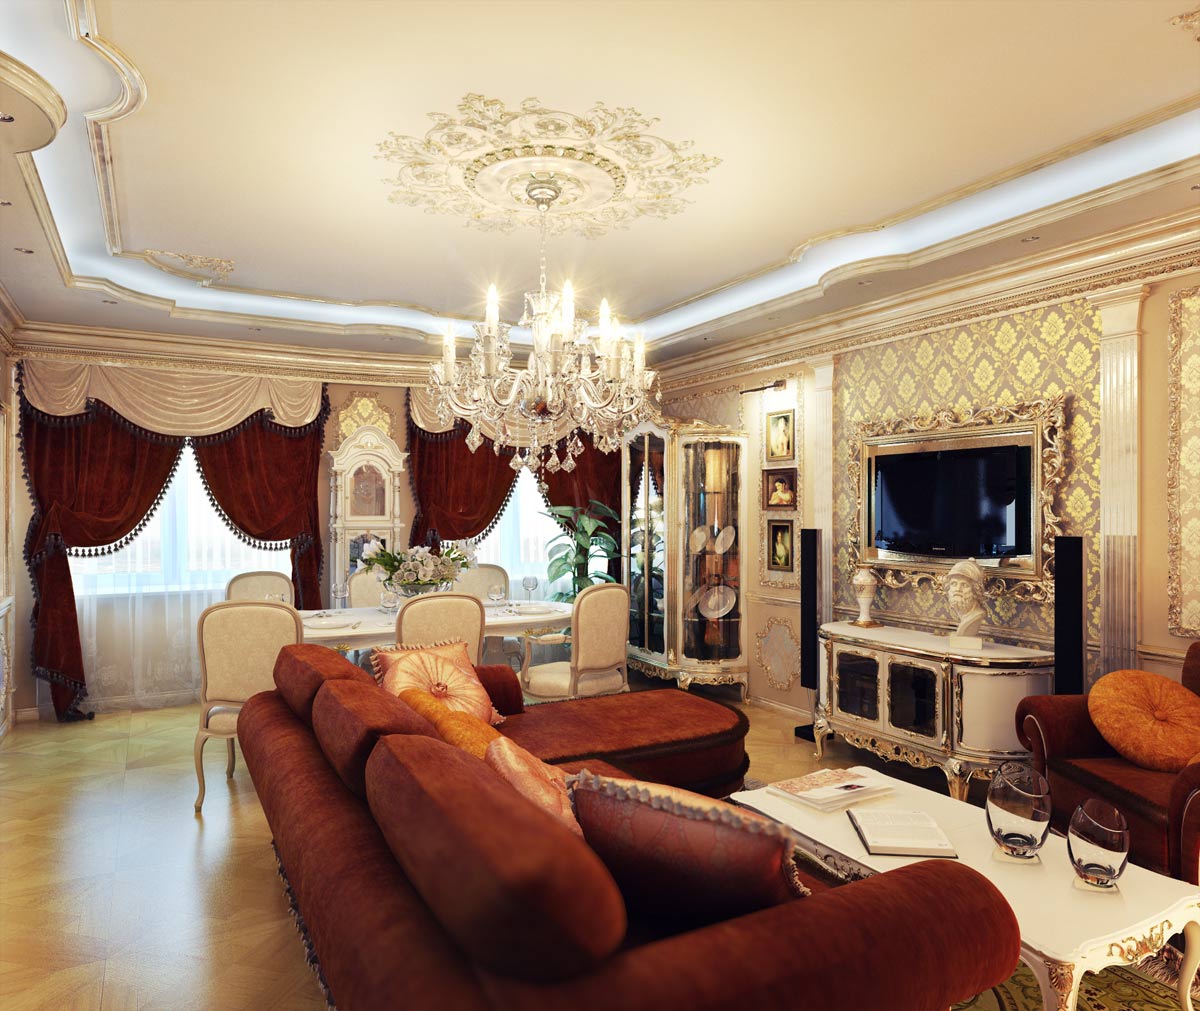 Old Style Room in a Boarding House Classic Interior Design  Style  Classicism style  